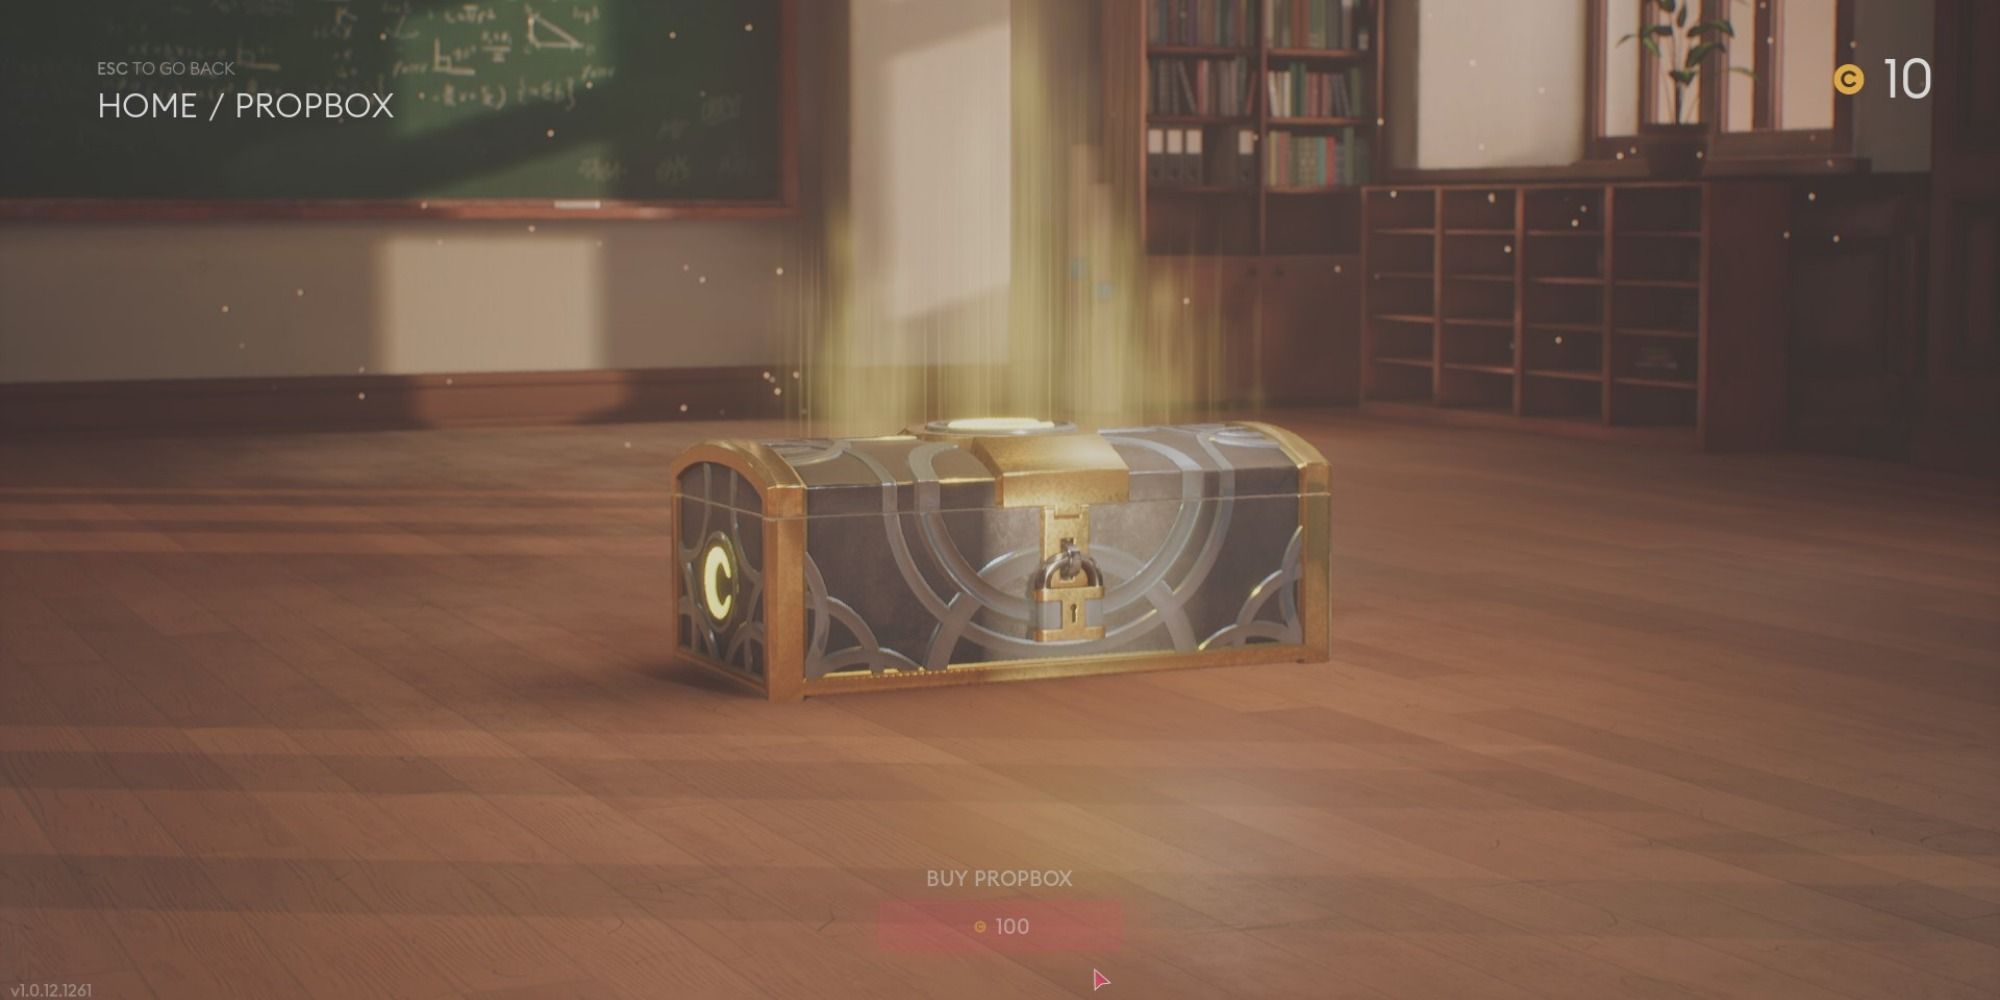 A glowing closed Propbox sits on the floor of a School classrom